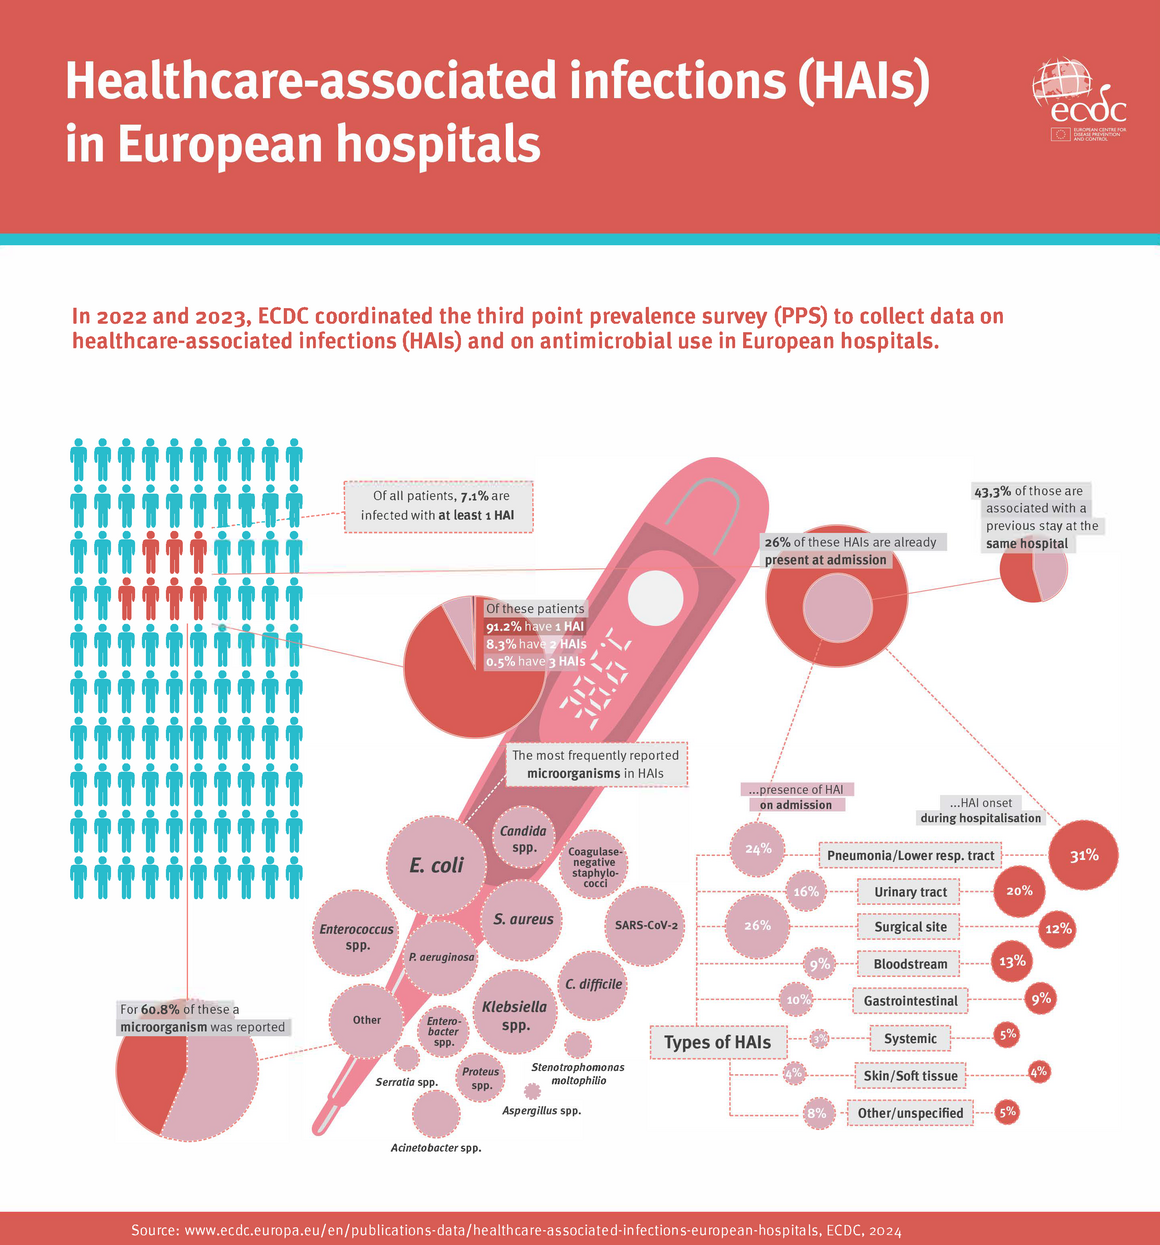 Healthcare-associated infections in European hospitals 2022-2023